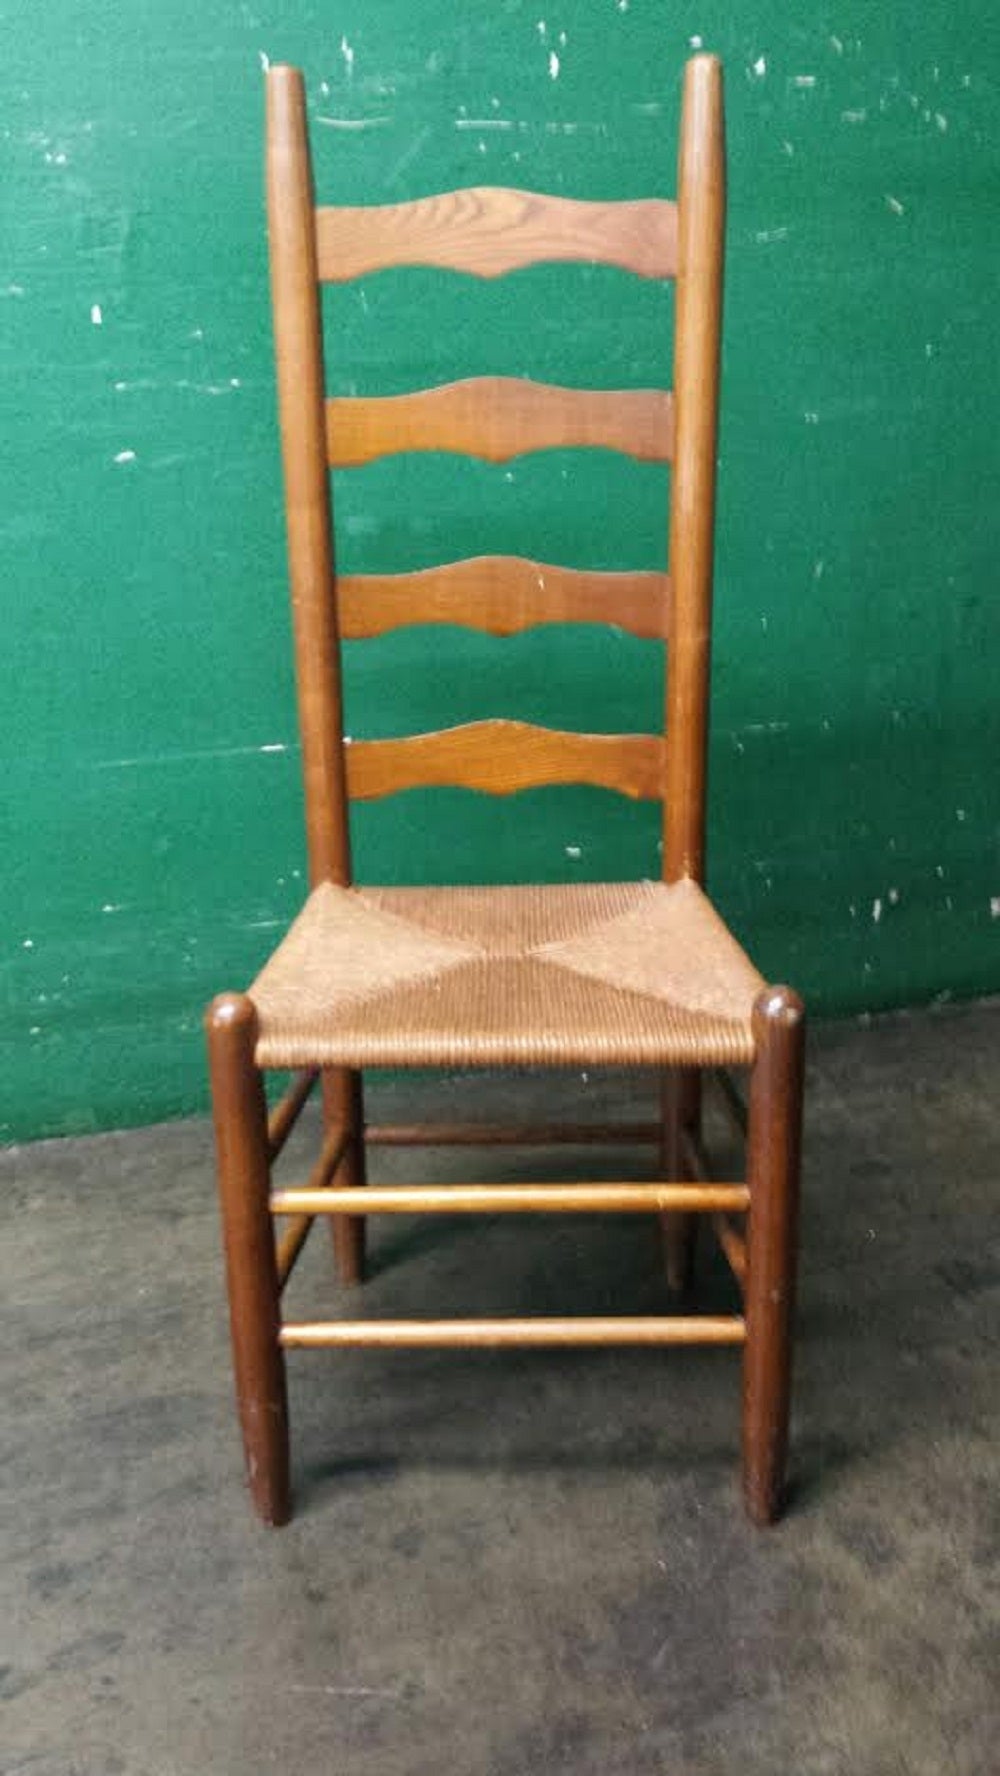 Set of Four Ladder Back Chairs. Pine wood. The seat is made from corn husk.